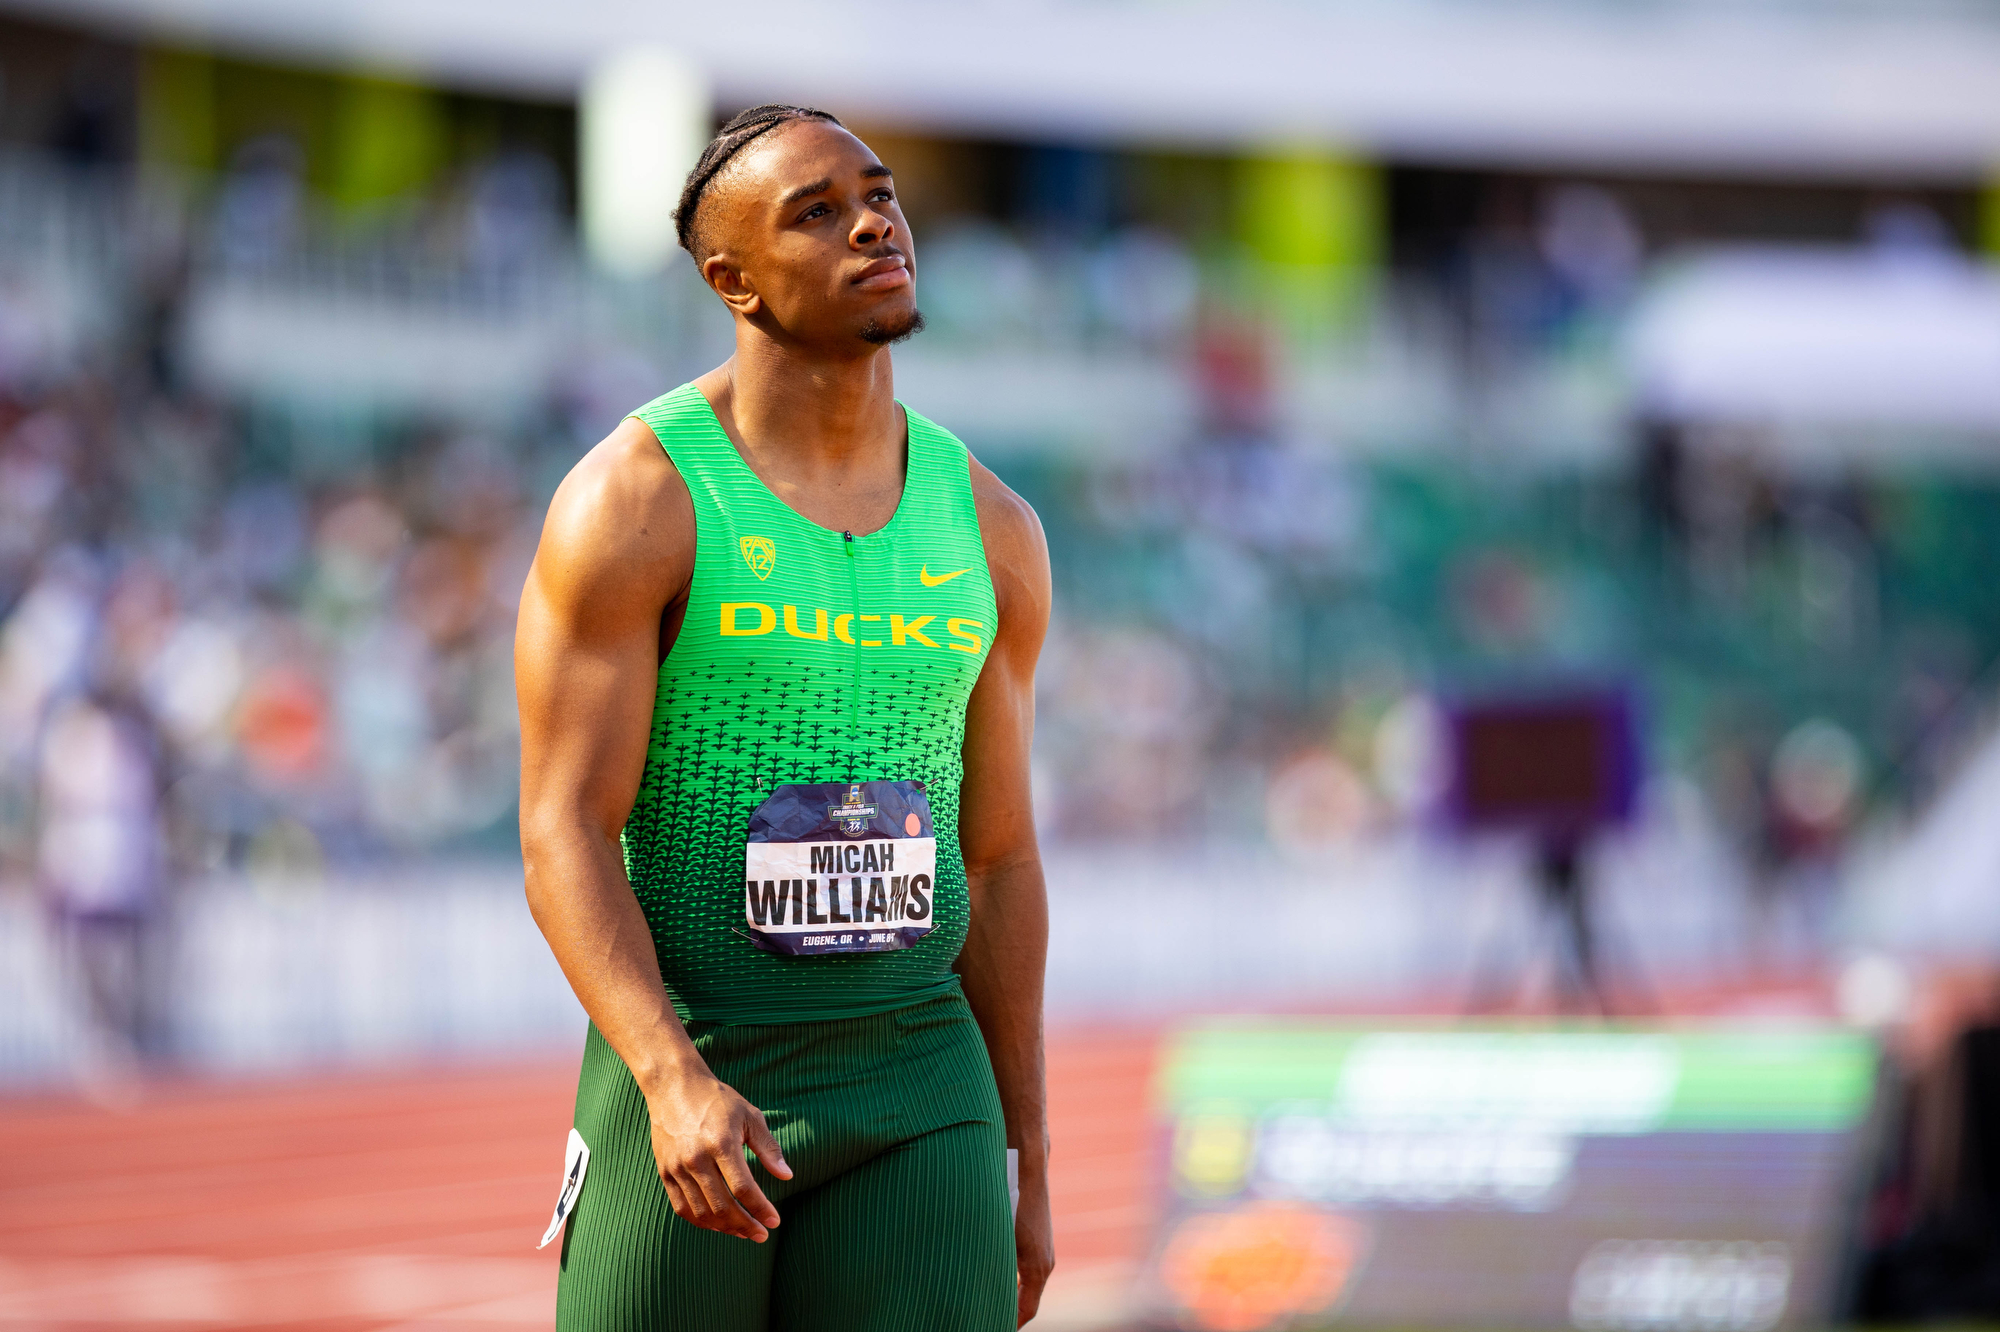 Ducks track and field championship jersey